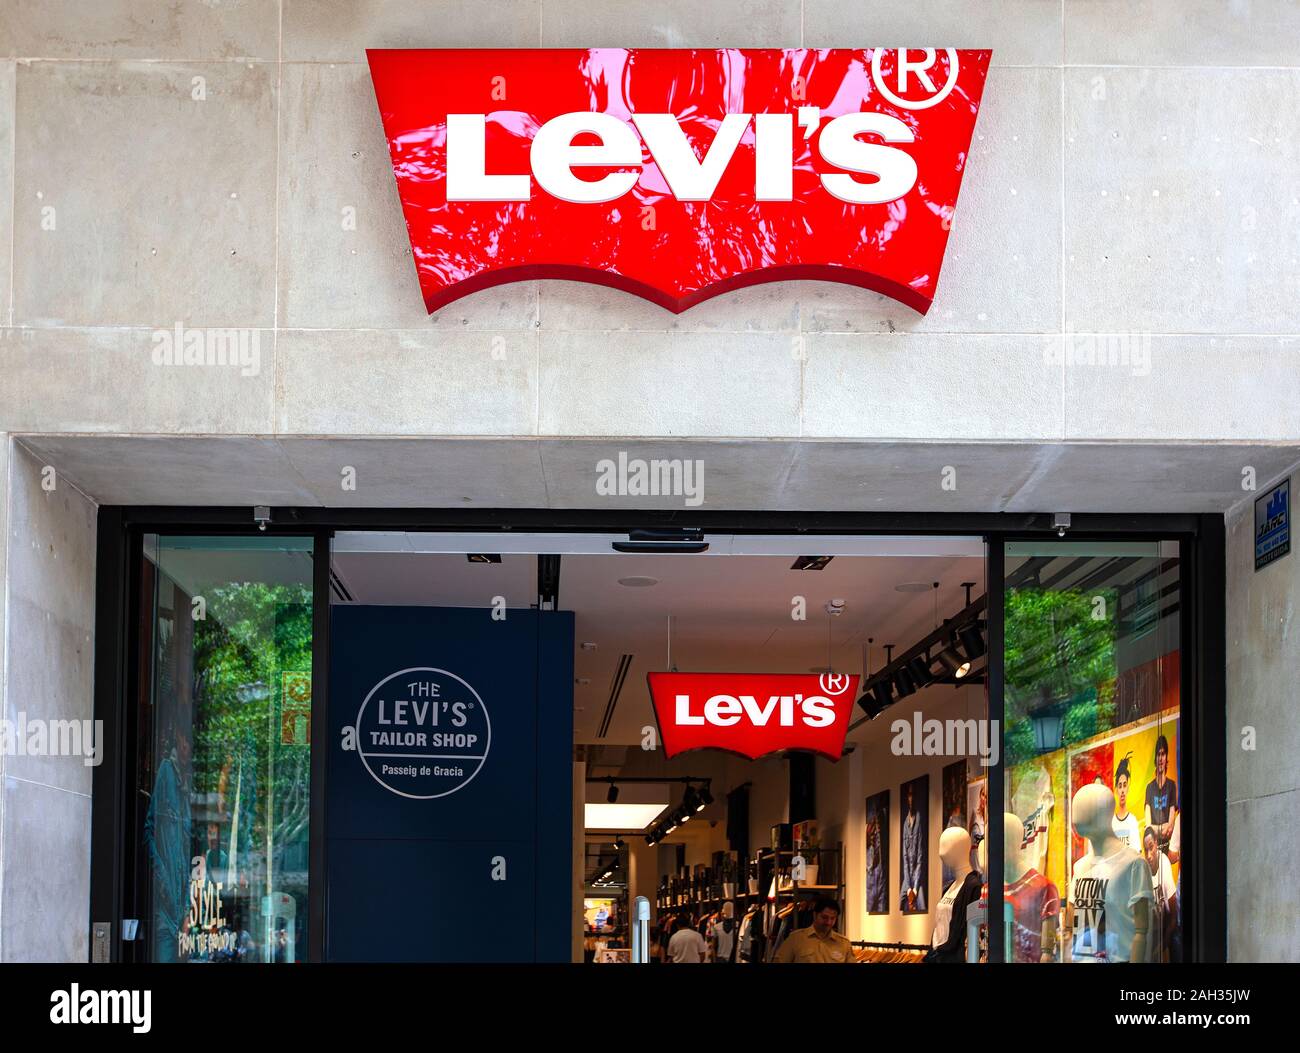 Levi Market High Resolution Stock Photography and Images - Alamy